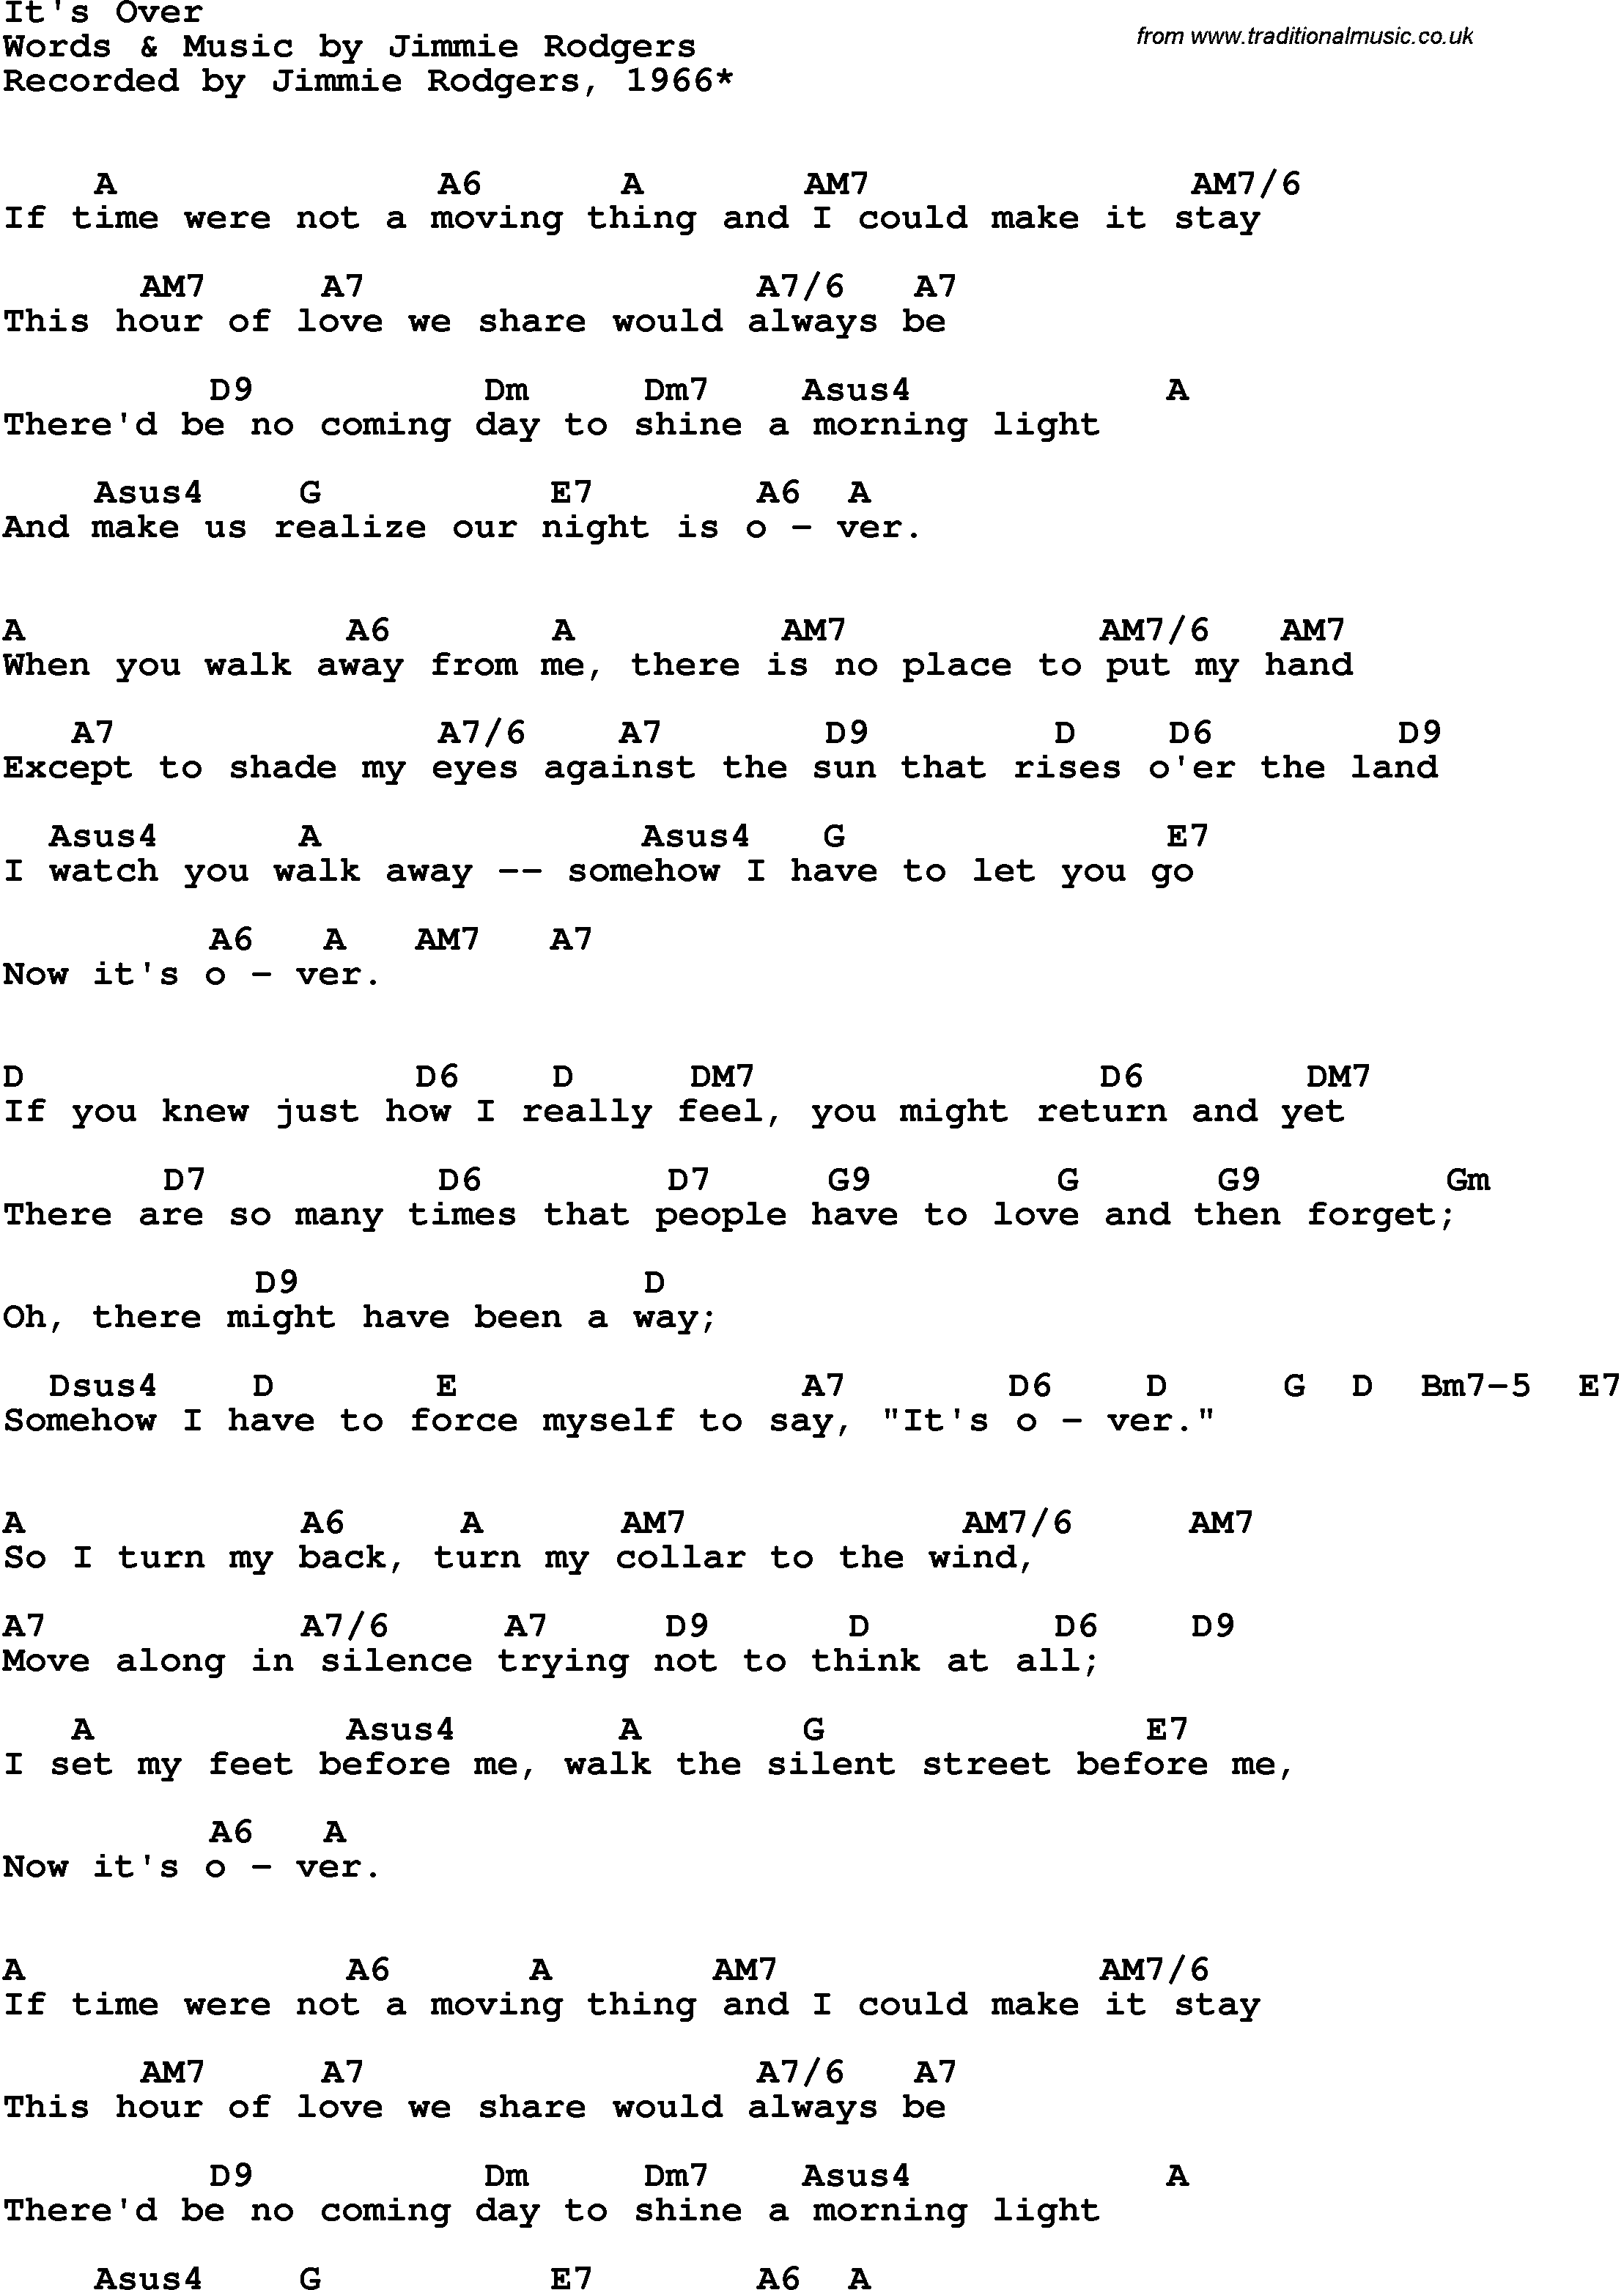 Song Lyrics with guitar chords for It's Over - Jimmy Rodgers, 1966